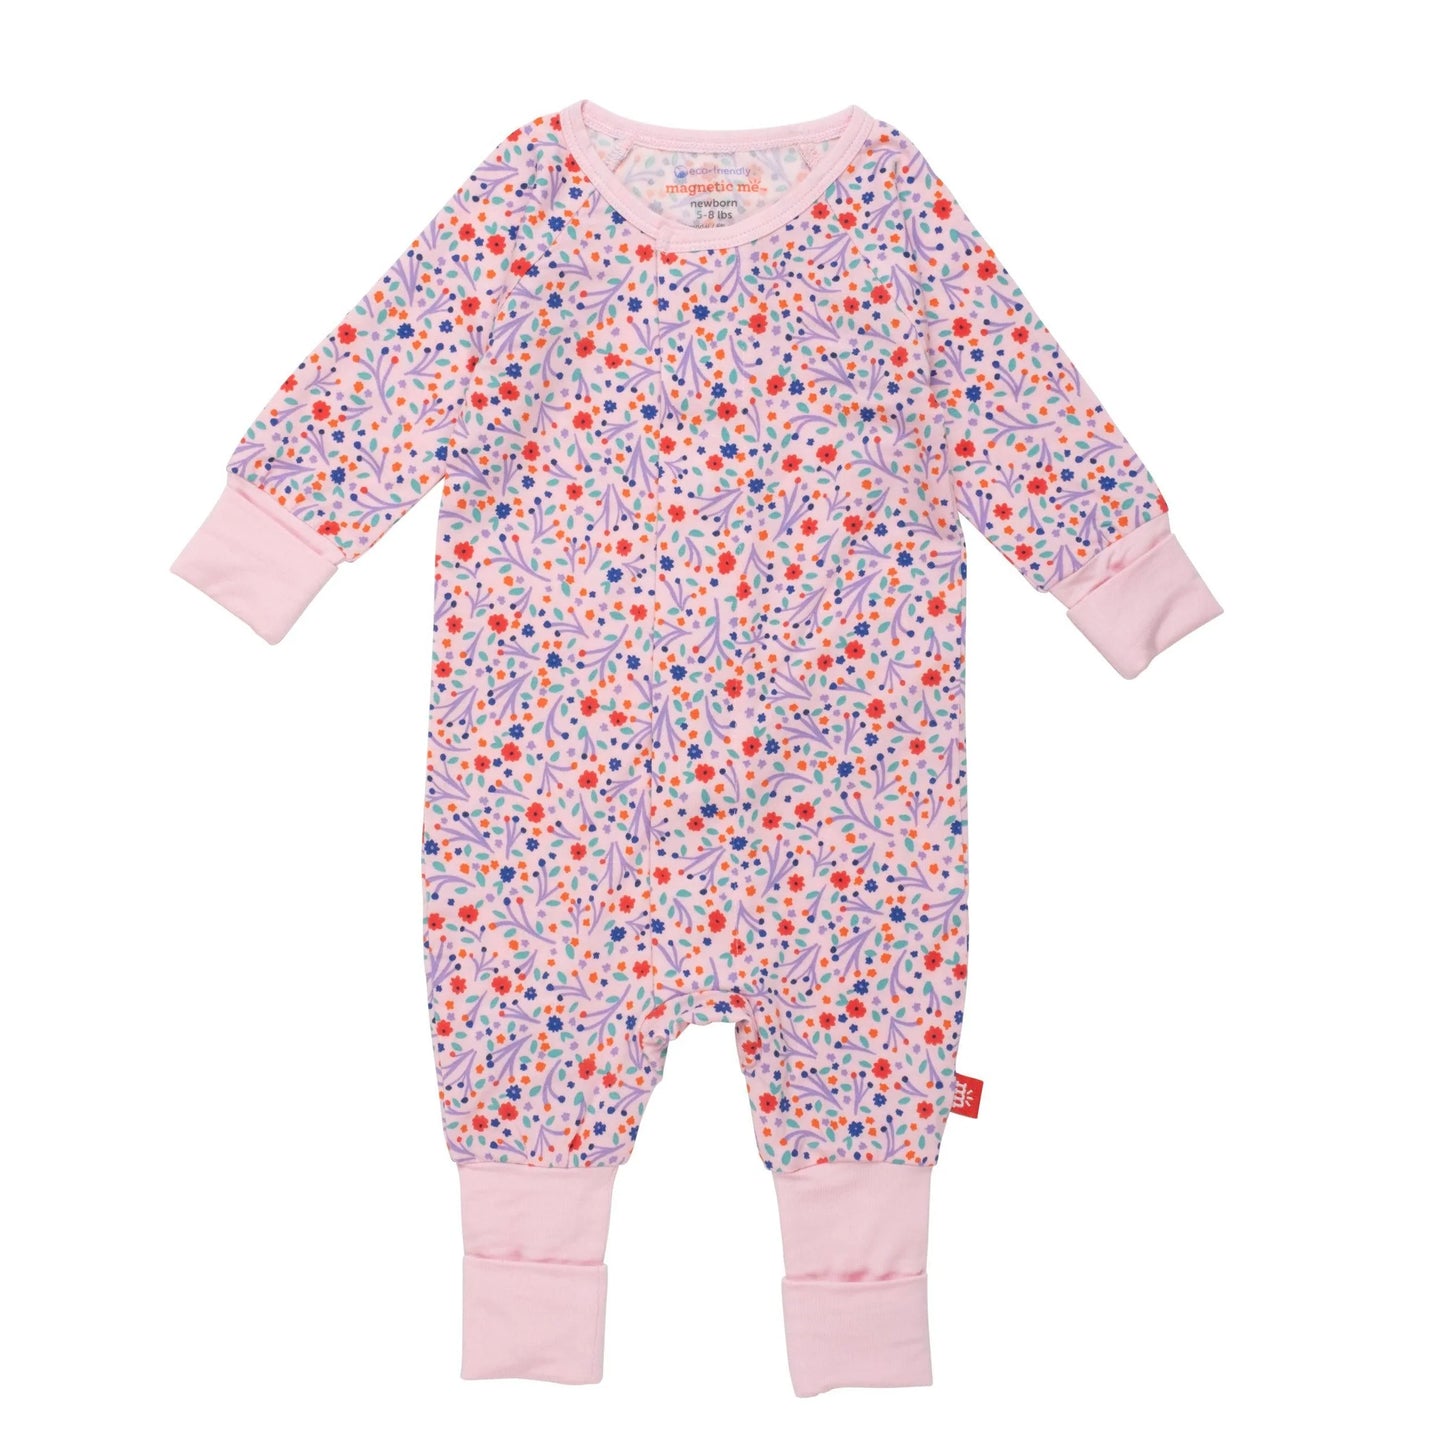 A Magnetic Me! Elizabeth Forever Convertible Mitten Cuff Coverall baby romper with flowers on it.